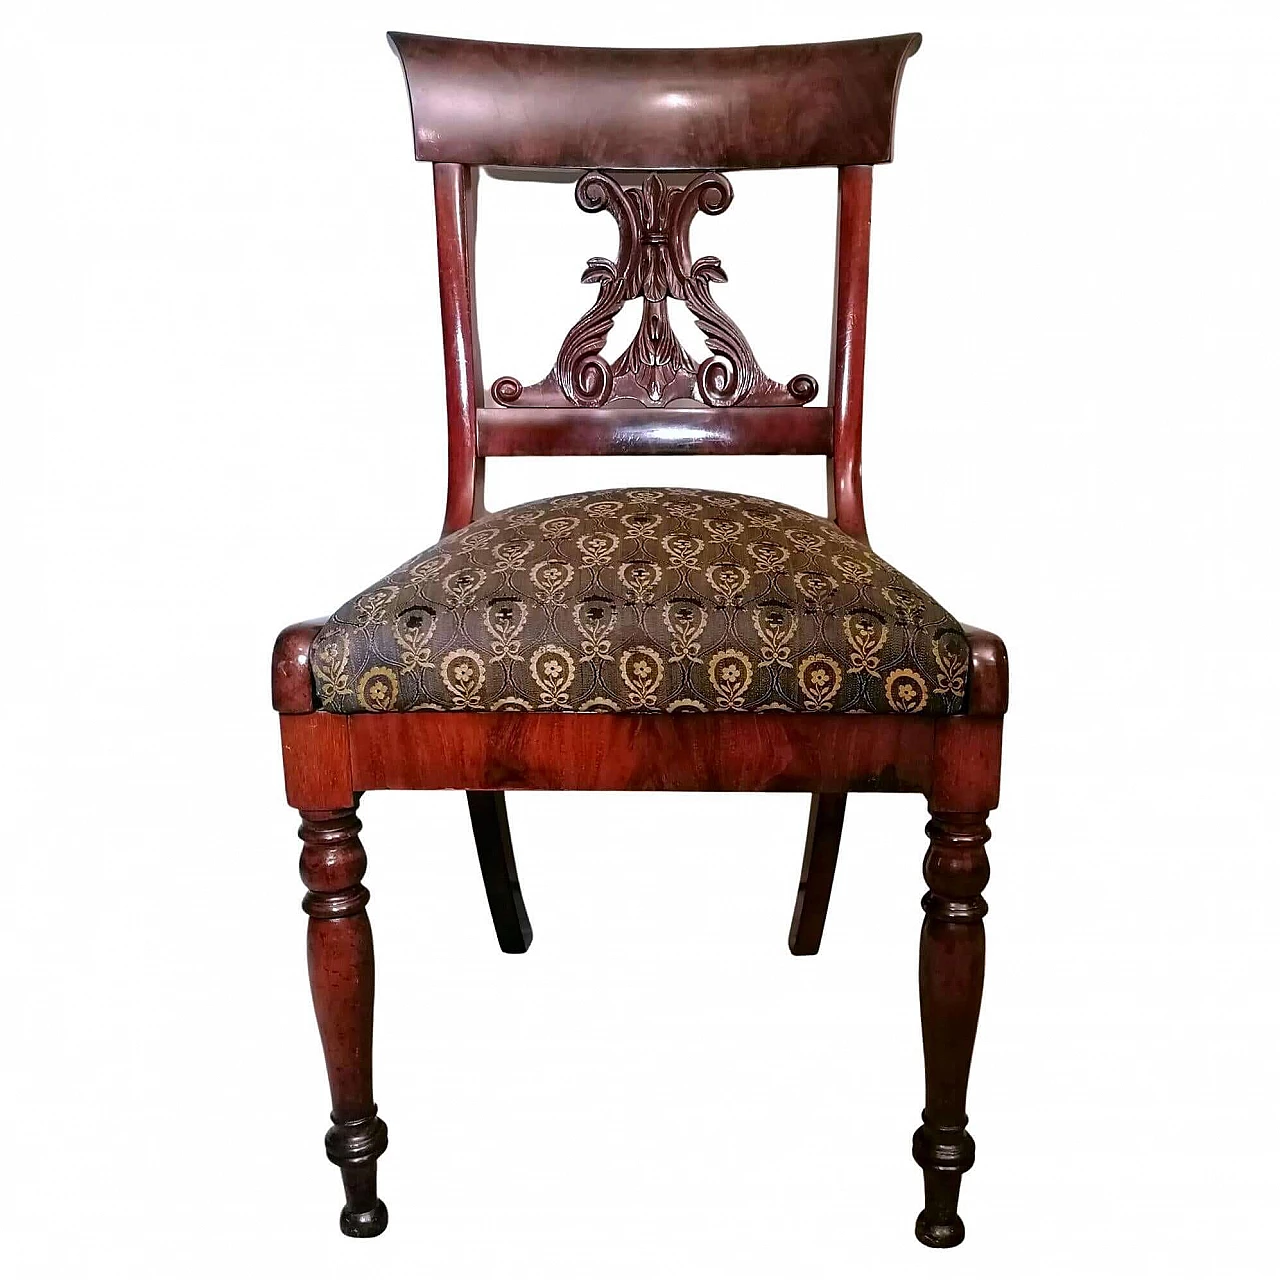 Biedermeier style chair in wood and fabric, 19th century 1466158